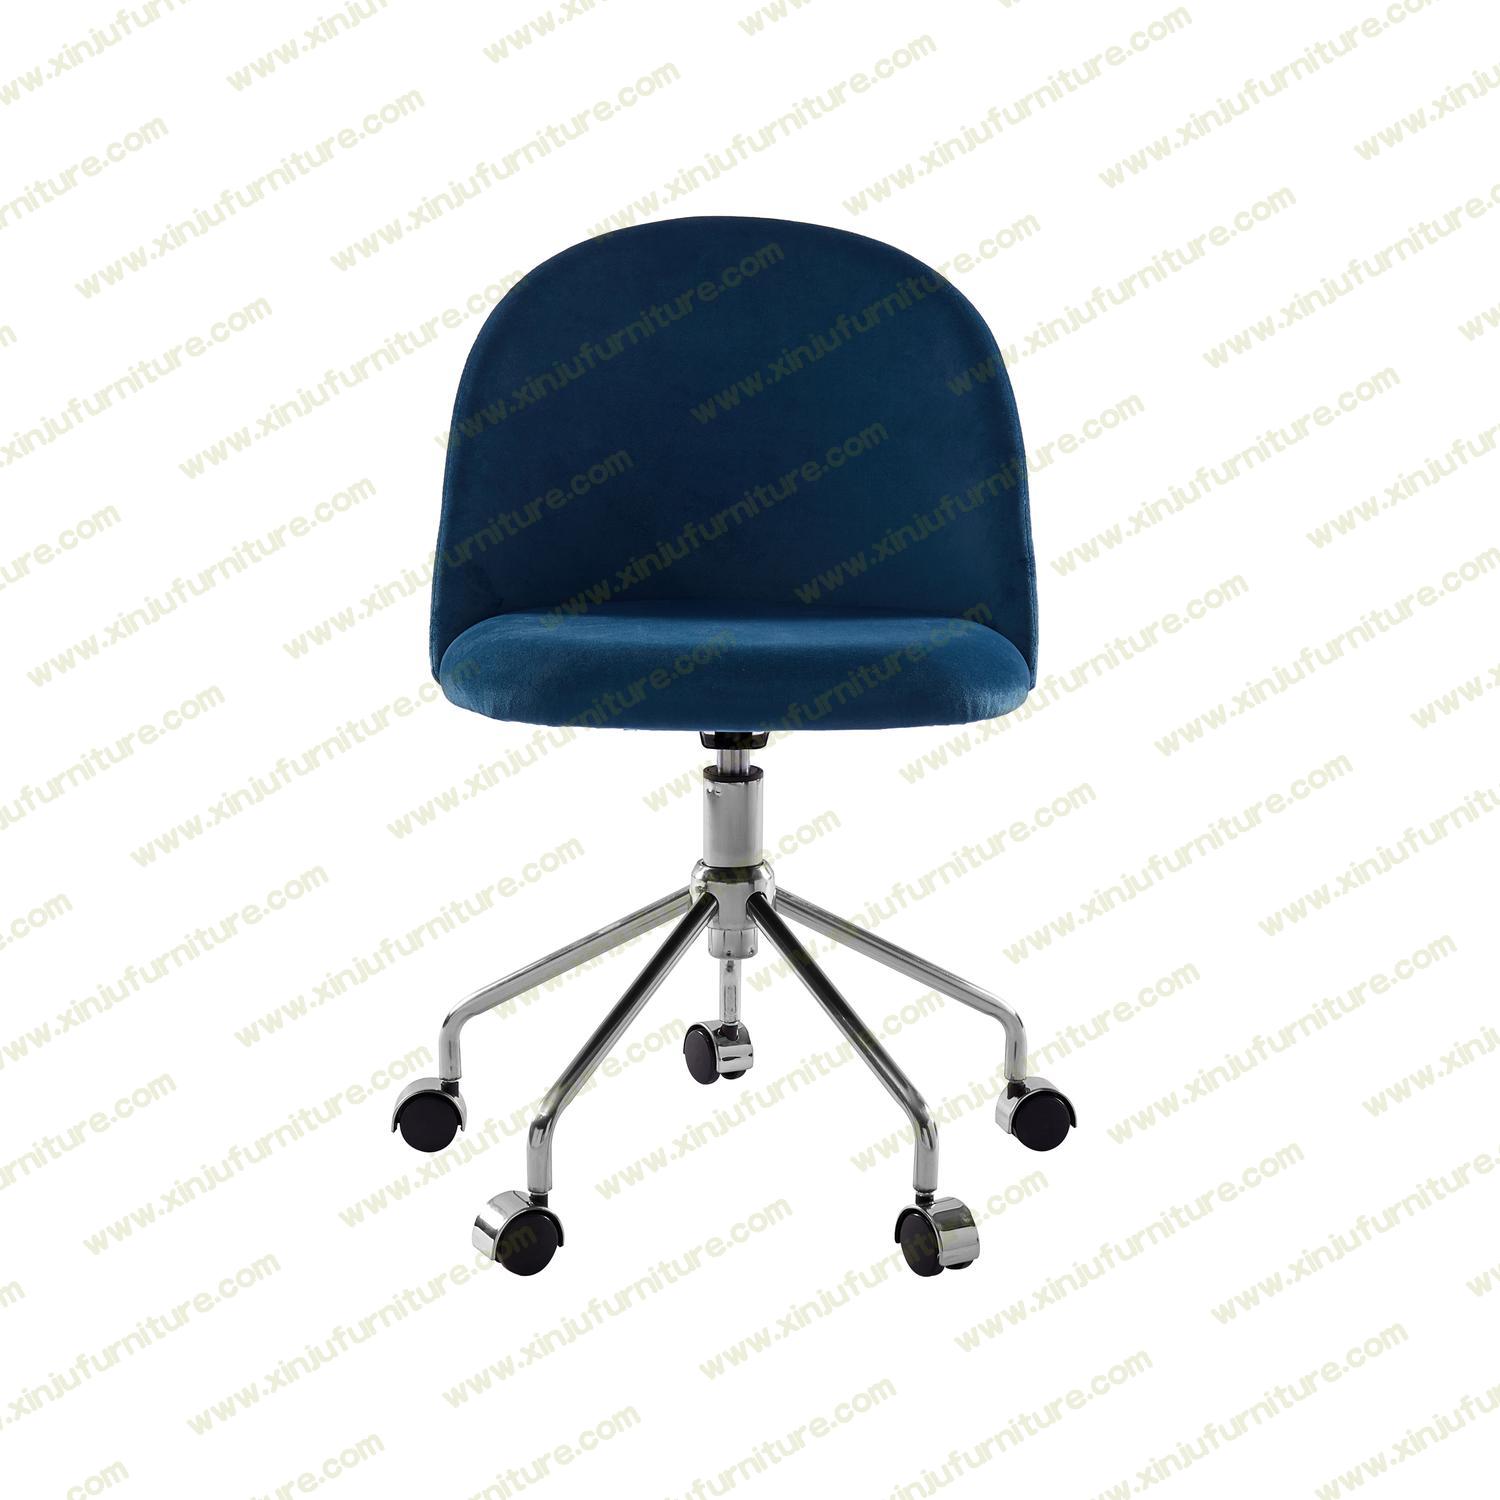 Simple movable tufted Office Chair Blue